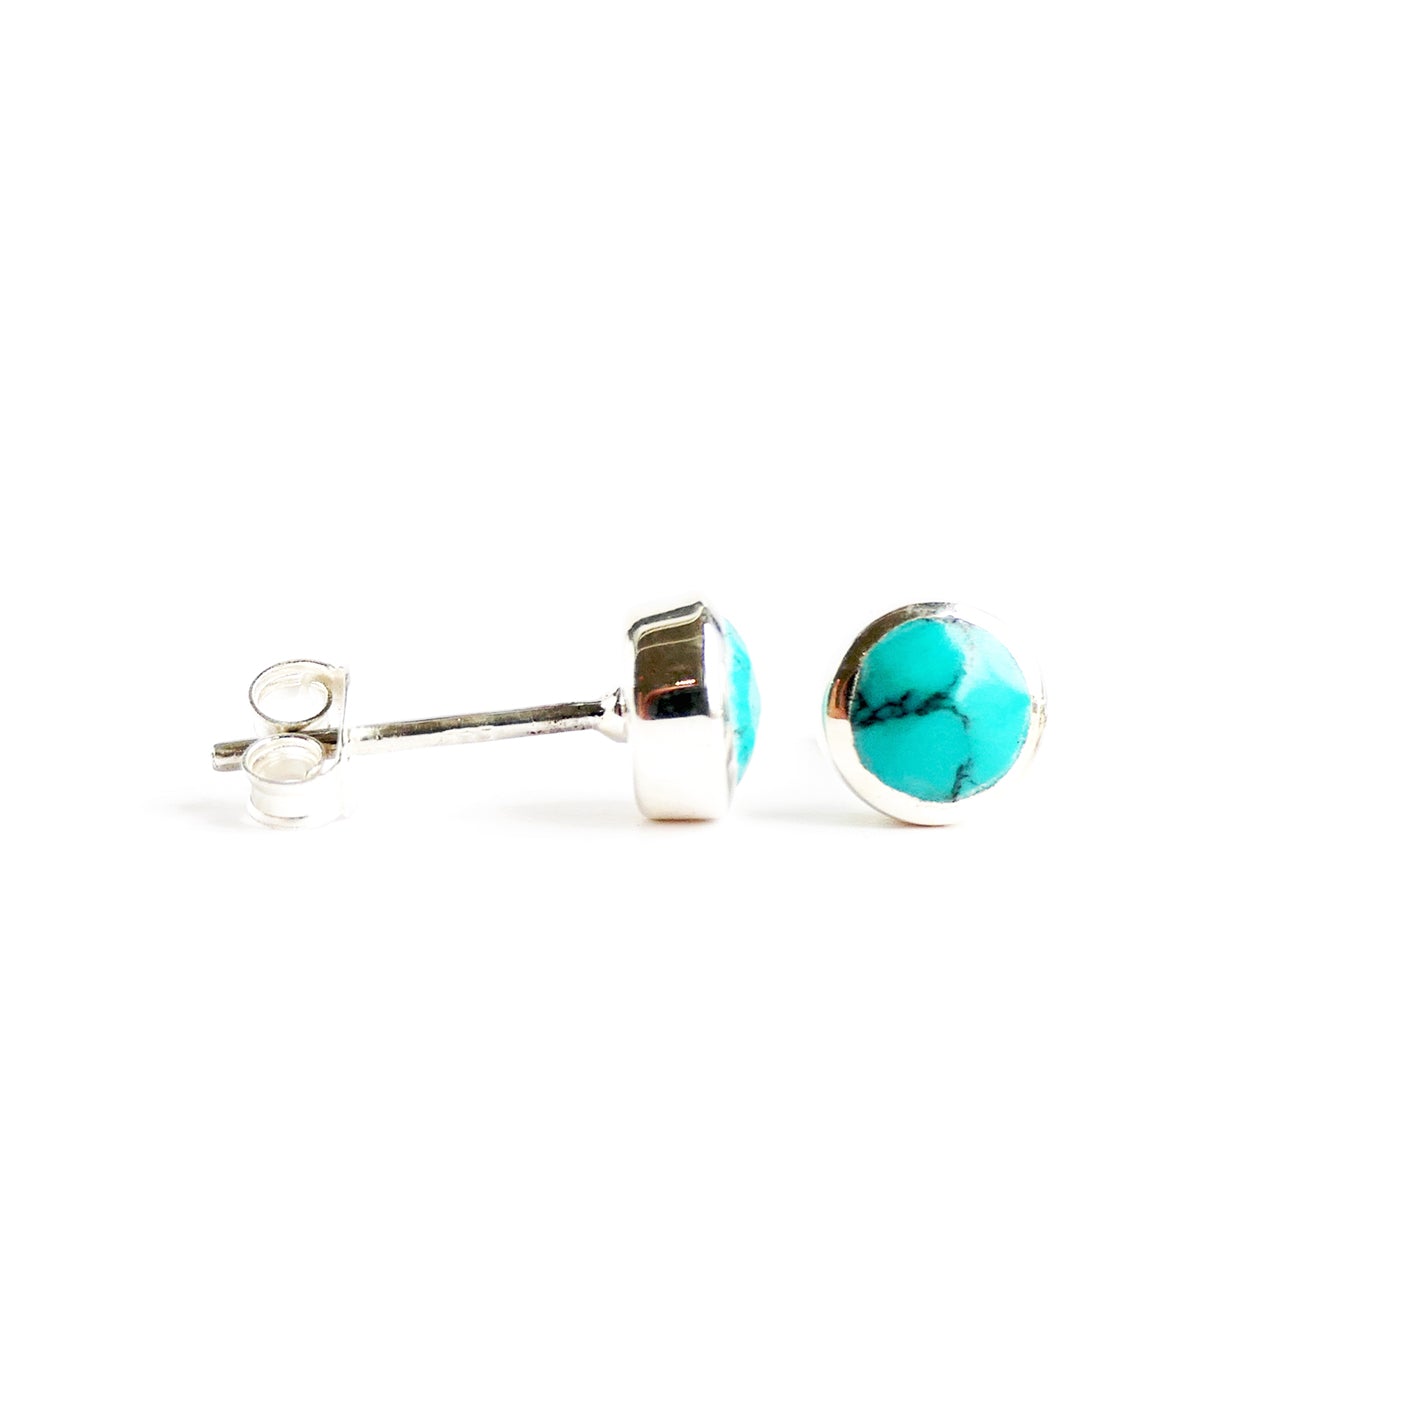 Birthstone Stud Earrings December: Turquoise and Sterling Silver